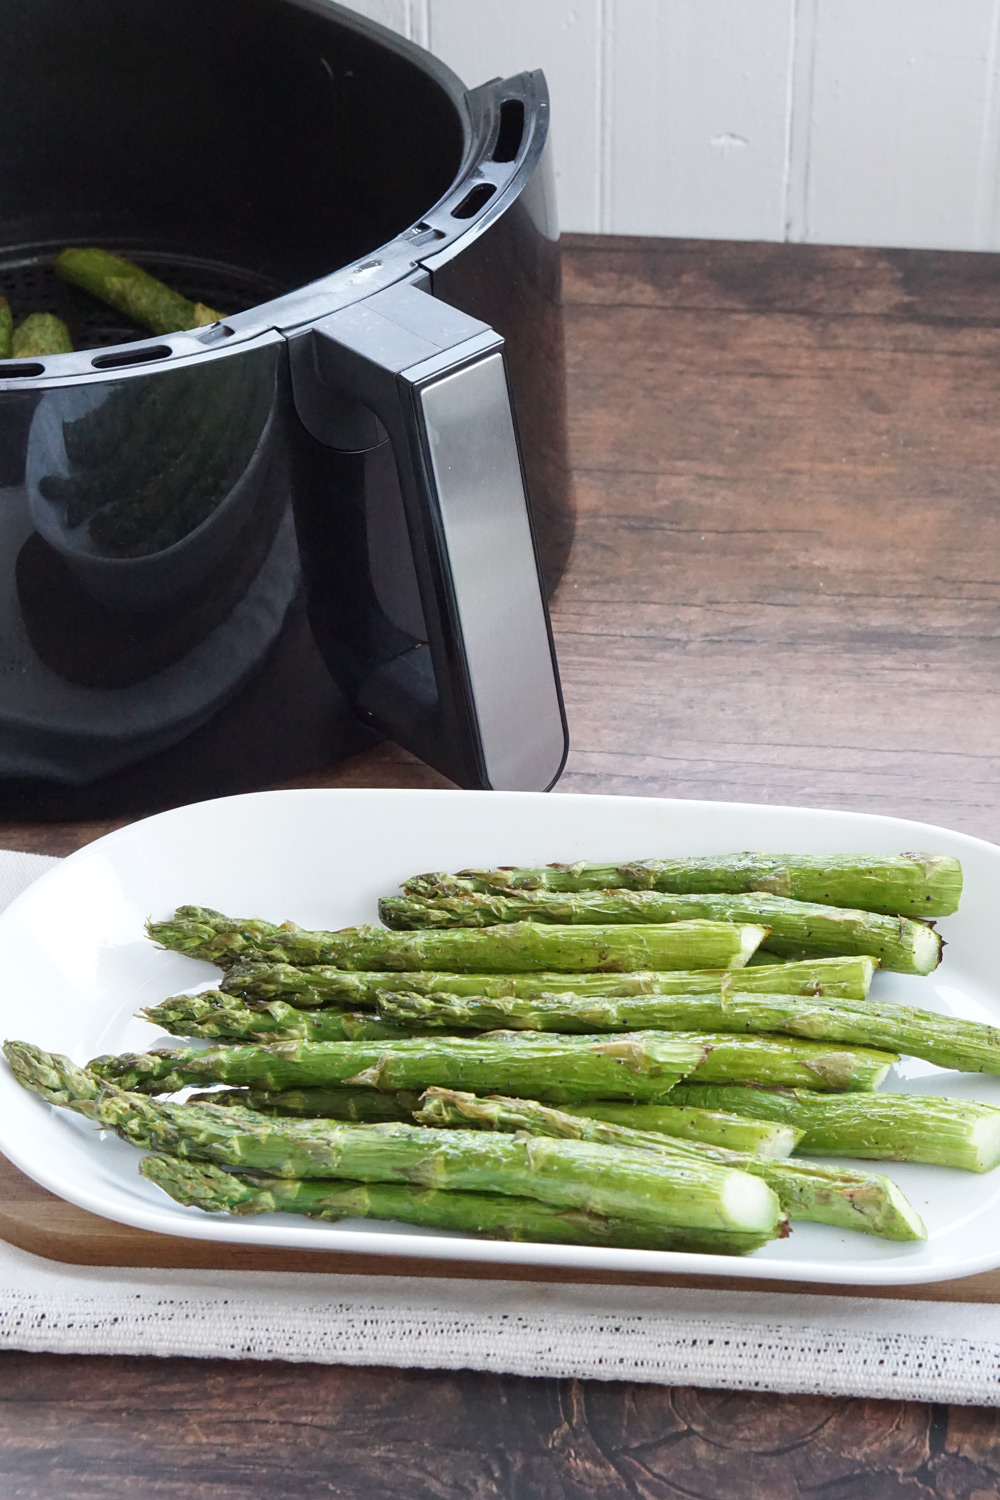 A plate of cooked asparagus with the air fryer basket in the background